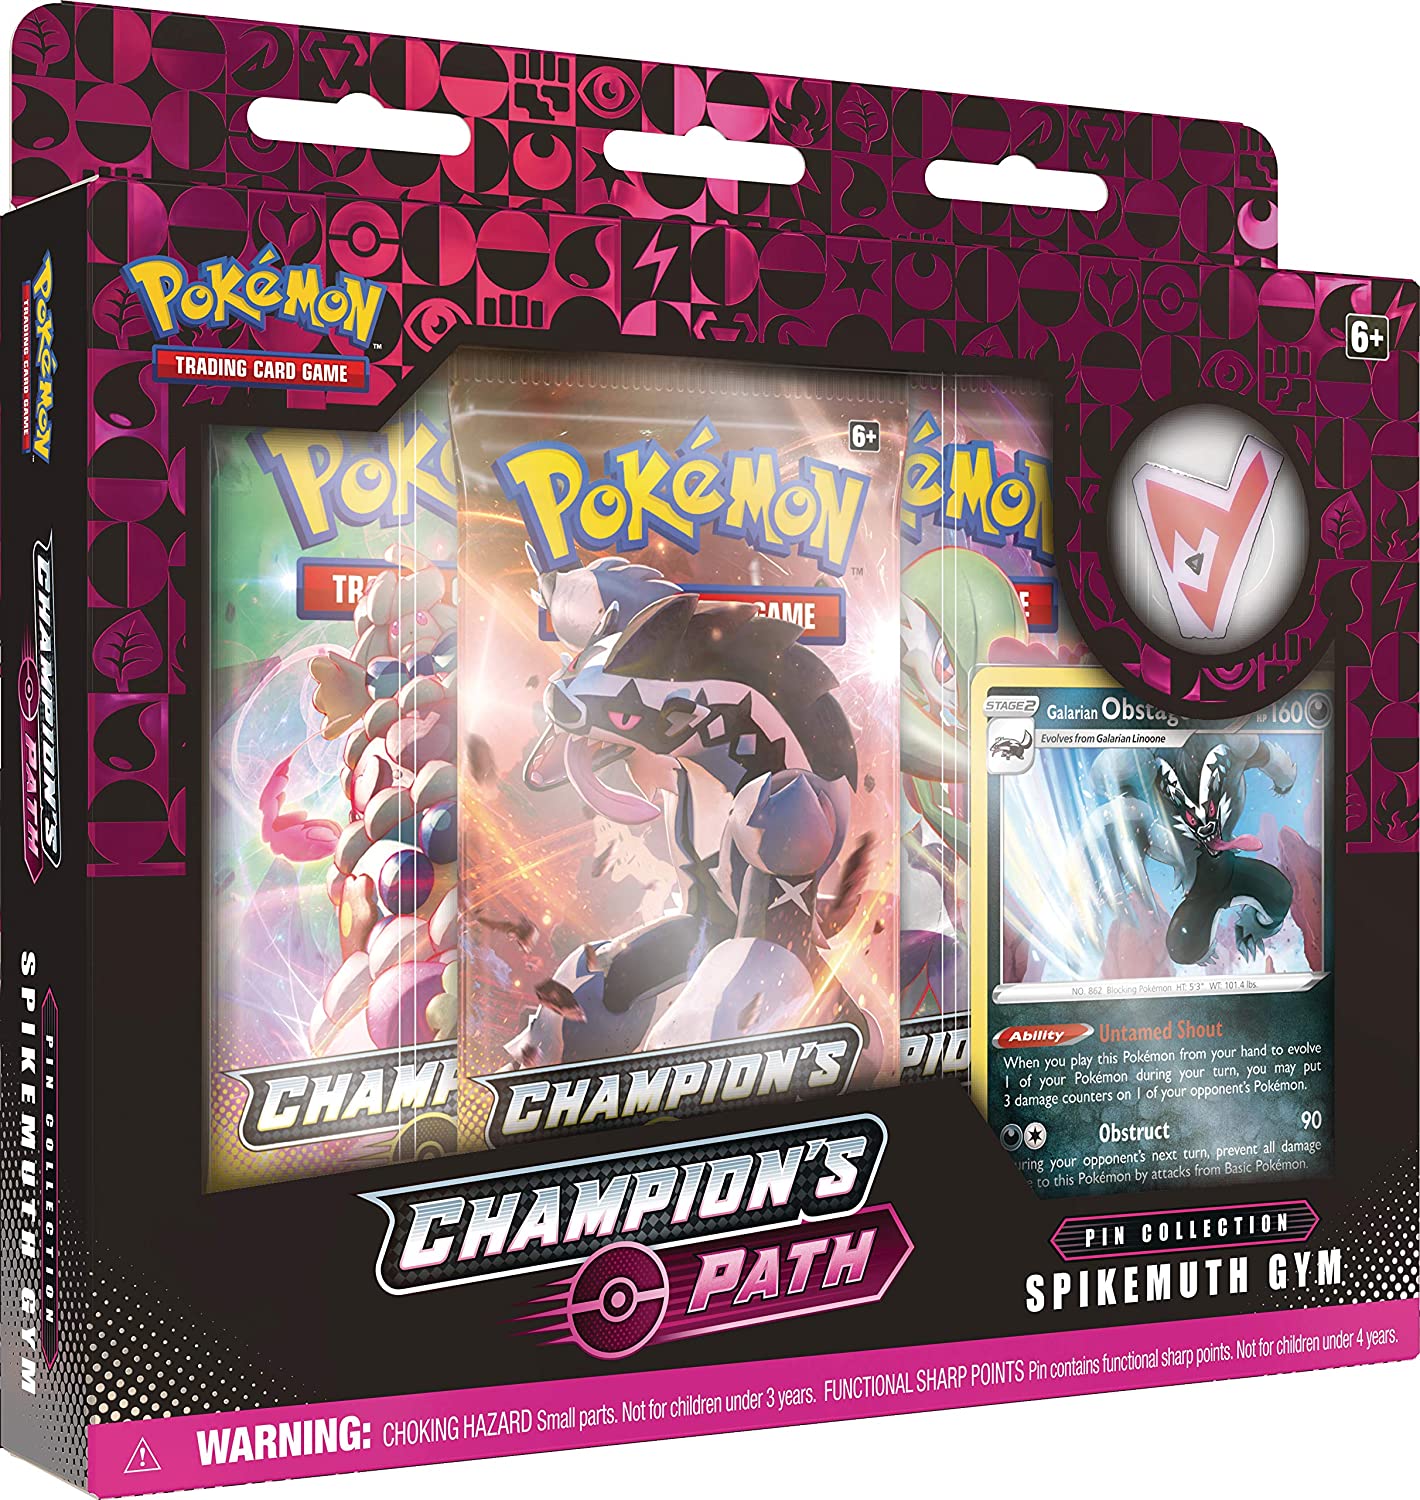 Champions Path - Spikemuth Gym Special Pin Collection Box